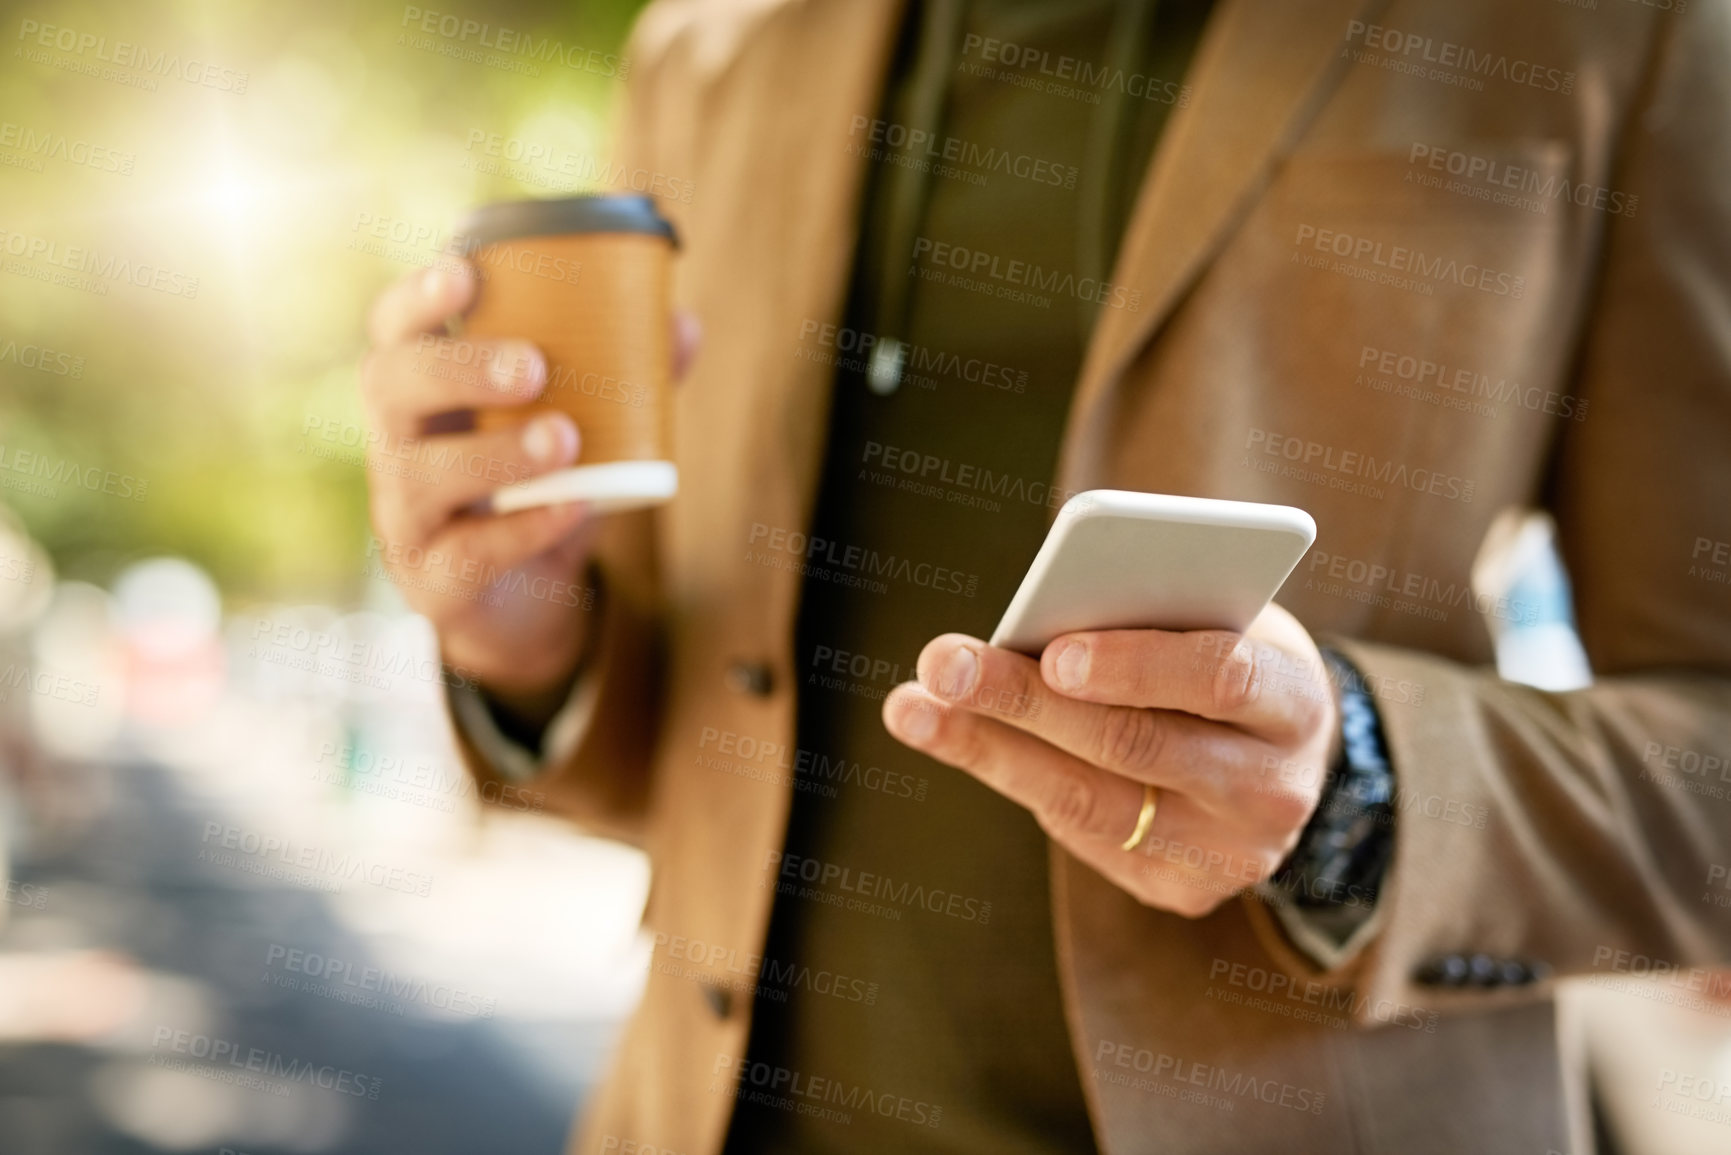 Buy stock photo Cropped shot of an unrecognizable man sending a text message during his morning commute